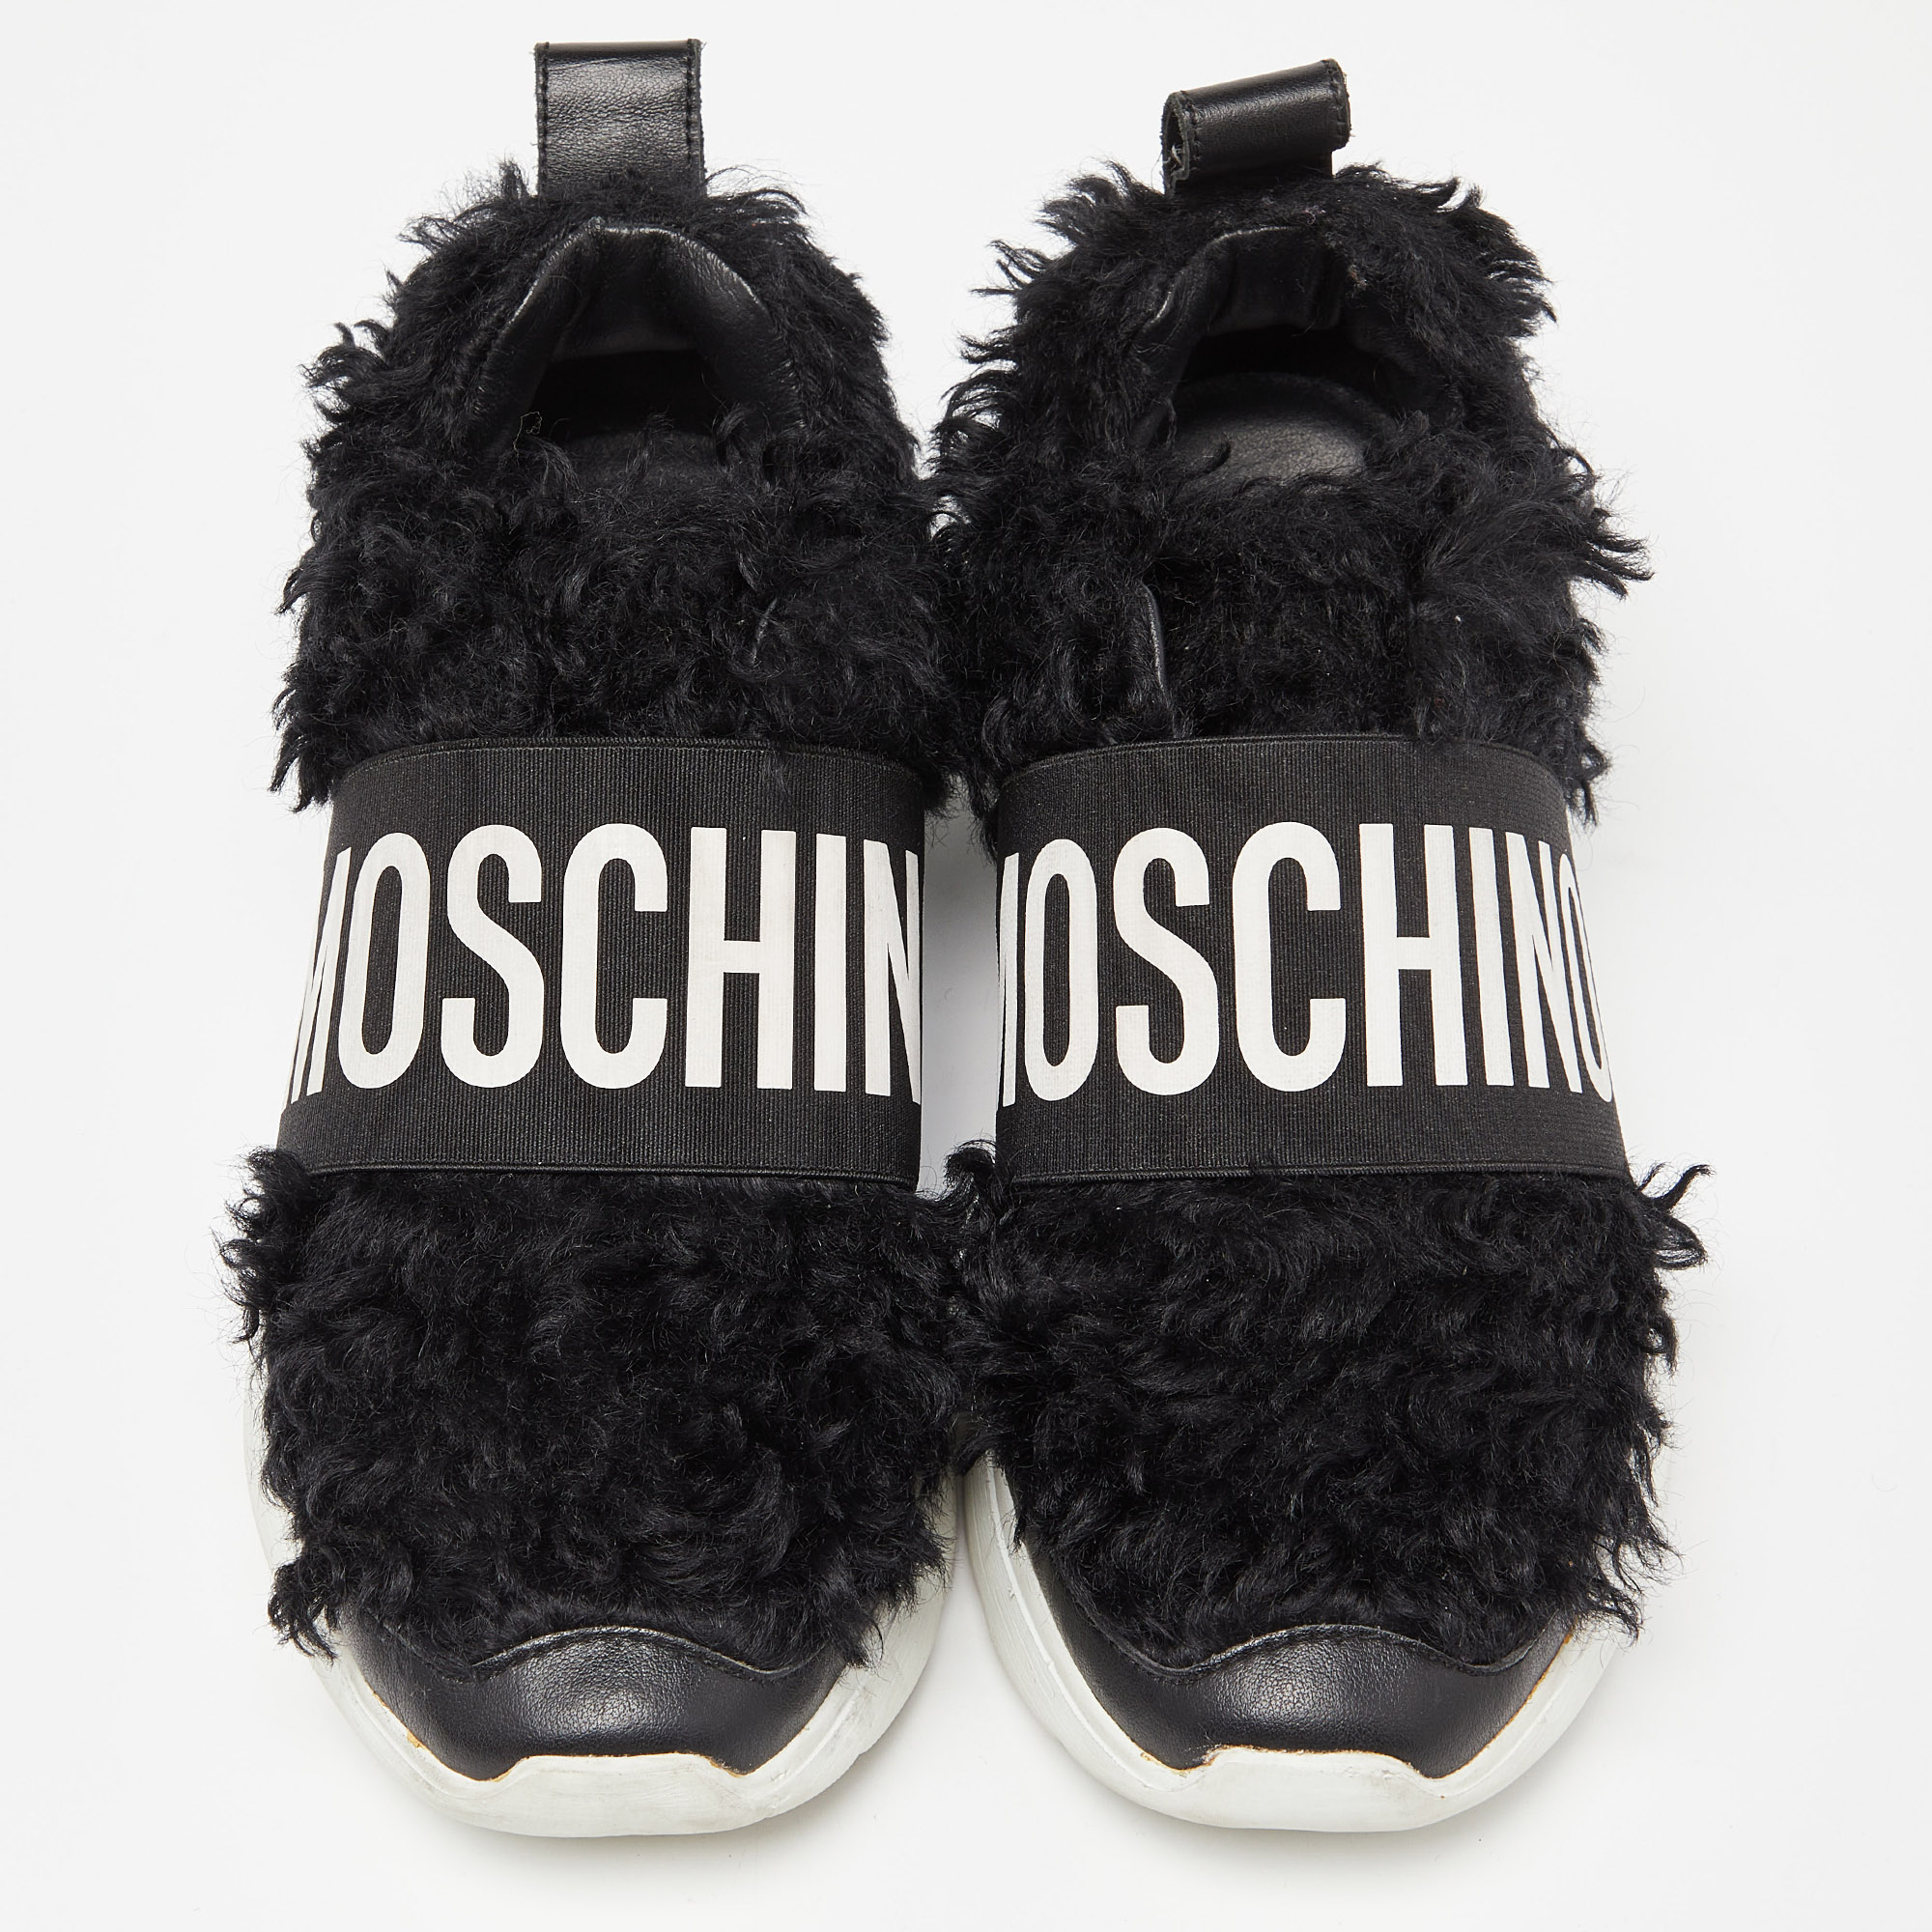 Moschino Black Leather And Faux Fur Logo Slip On Sneakers Size 37